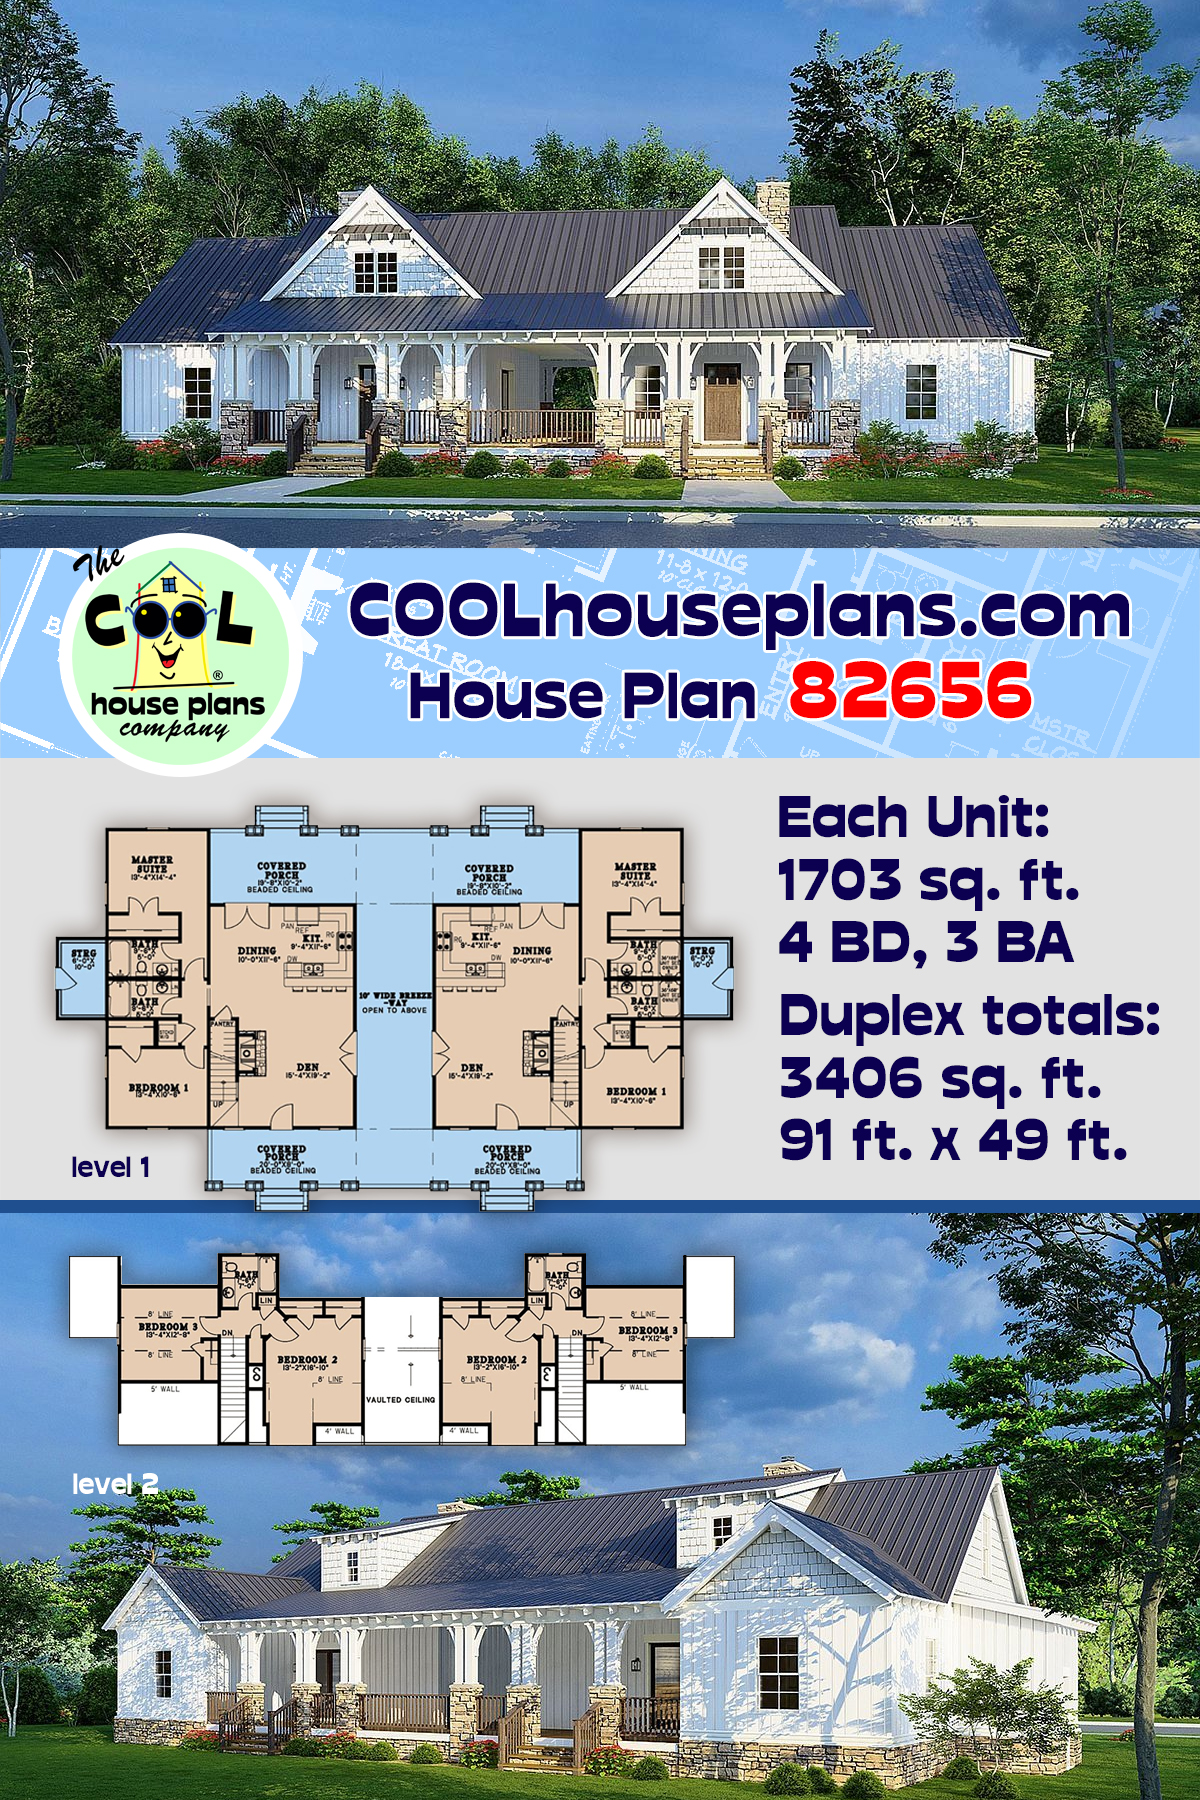 Bungalow, Cabin, Cottage, Country, Craftsman, Farmhouse Multi-Family Plan 82656 with 4 Beds, 3 Baths